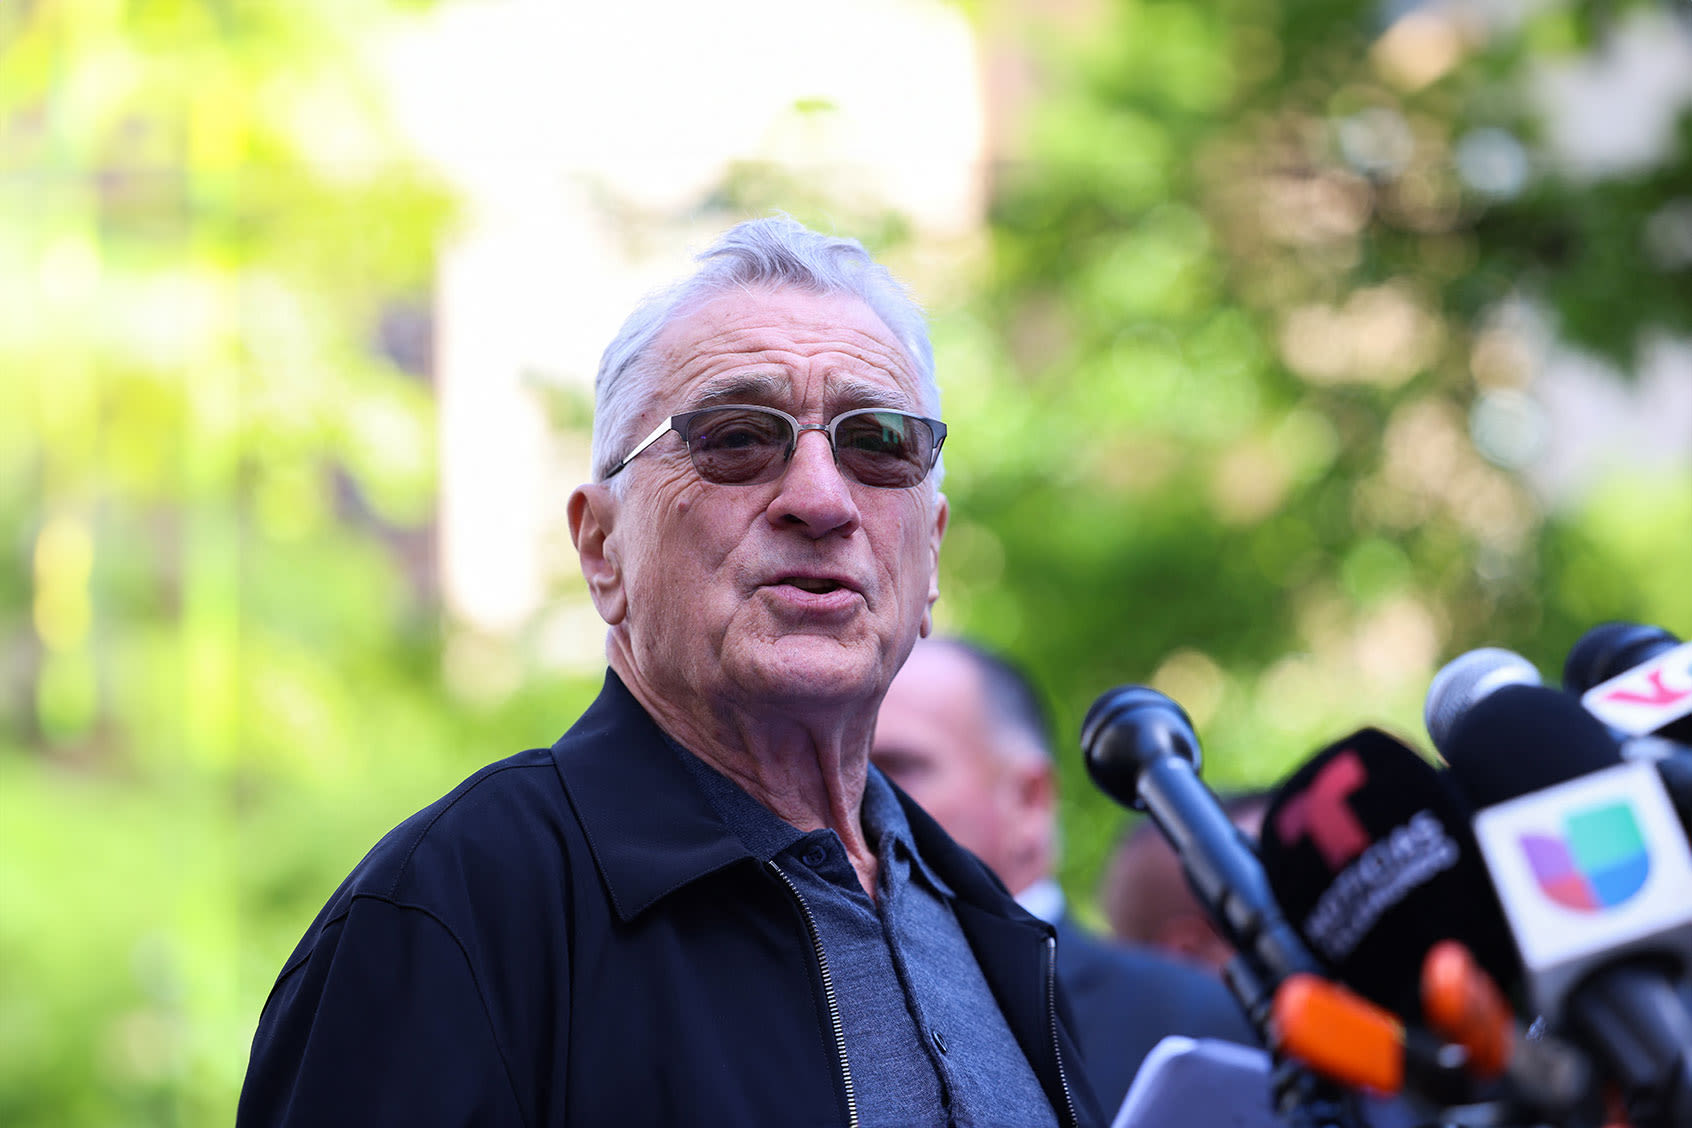 De Niro is proof Democrats are starting to get it: Take the fight to Donald Trump